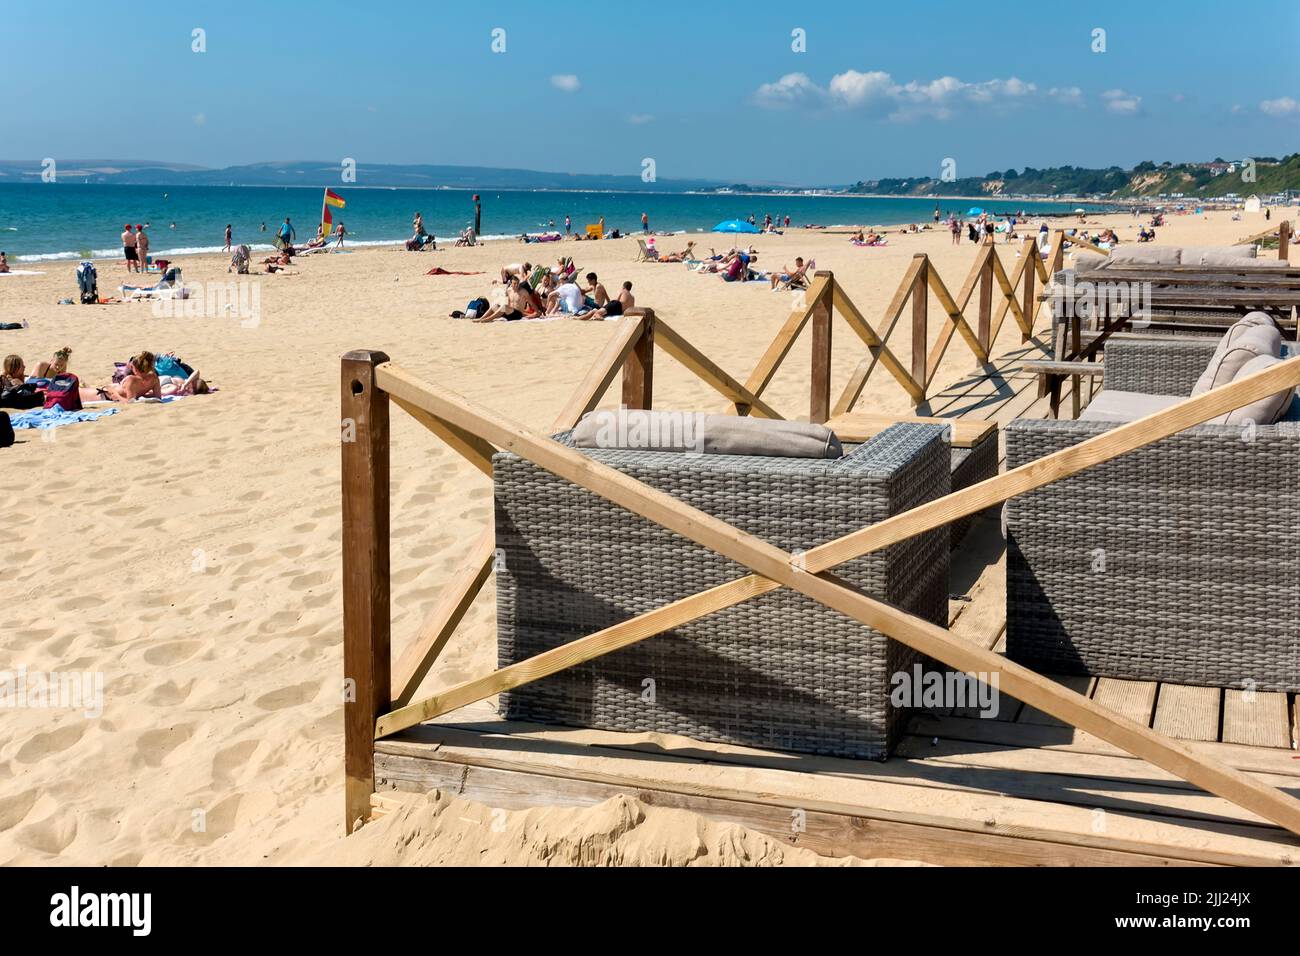 Bournemouth, Dorset, UK - July 11 2018: People relaxing and sunbathing on a hot summers day at Bournemouth Beach in Dorset, England, UK Stock Photo